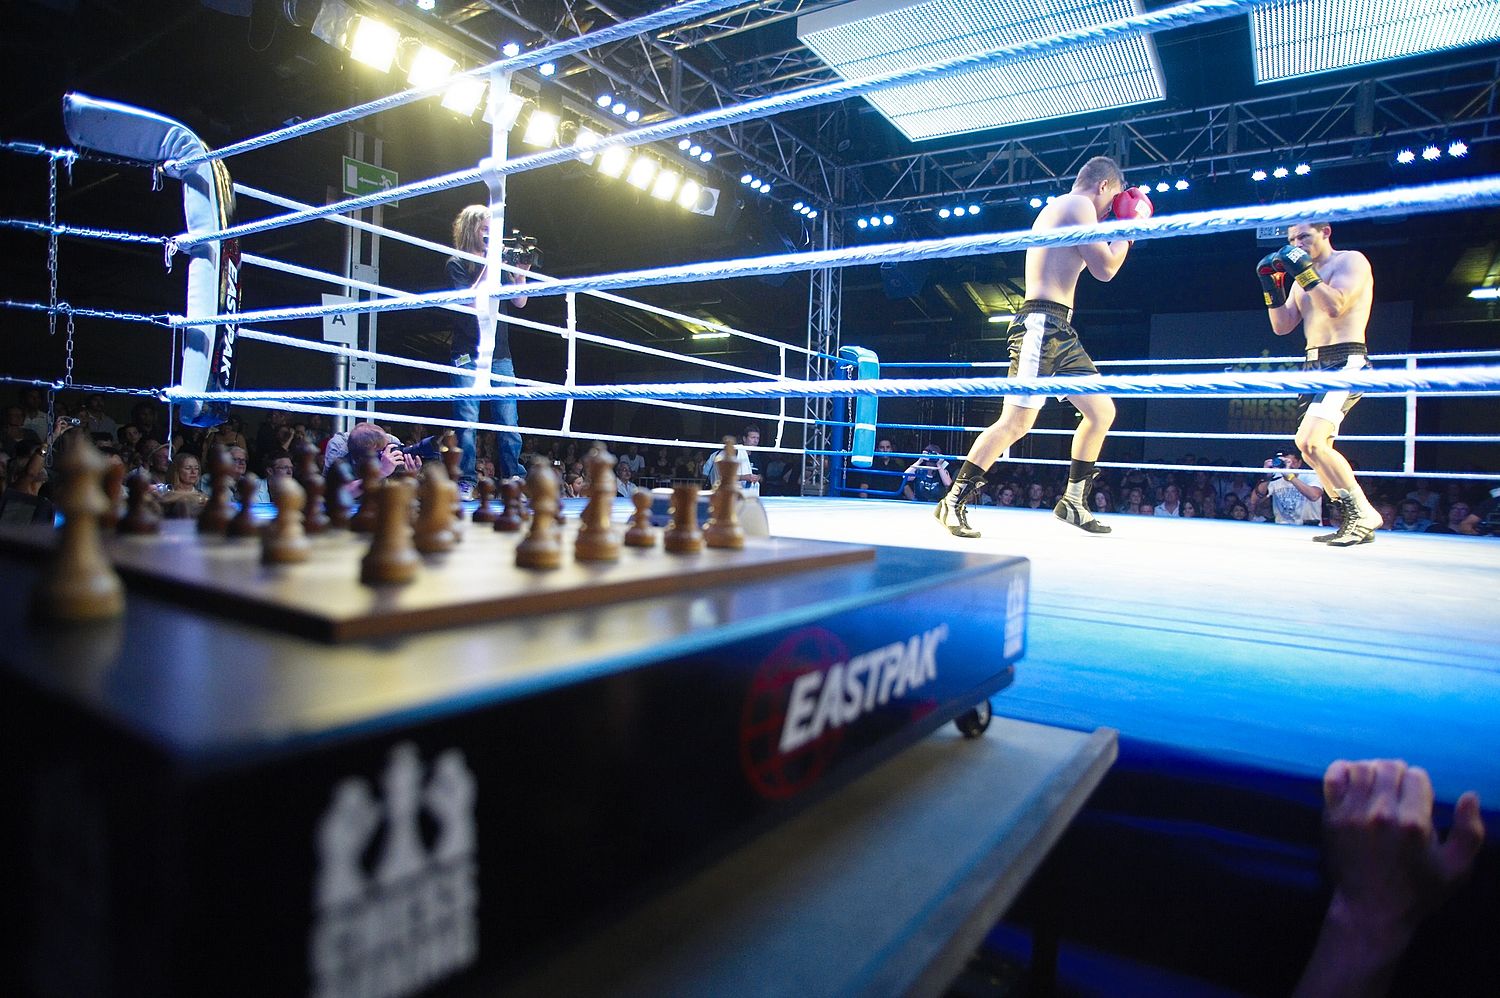 Chess boxing is making moves, increasing popularity in Europe